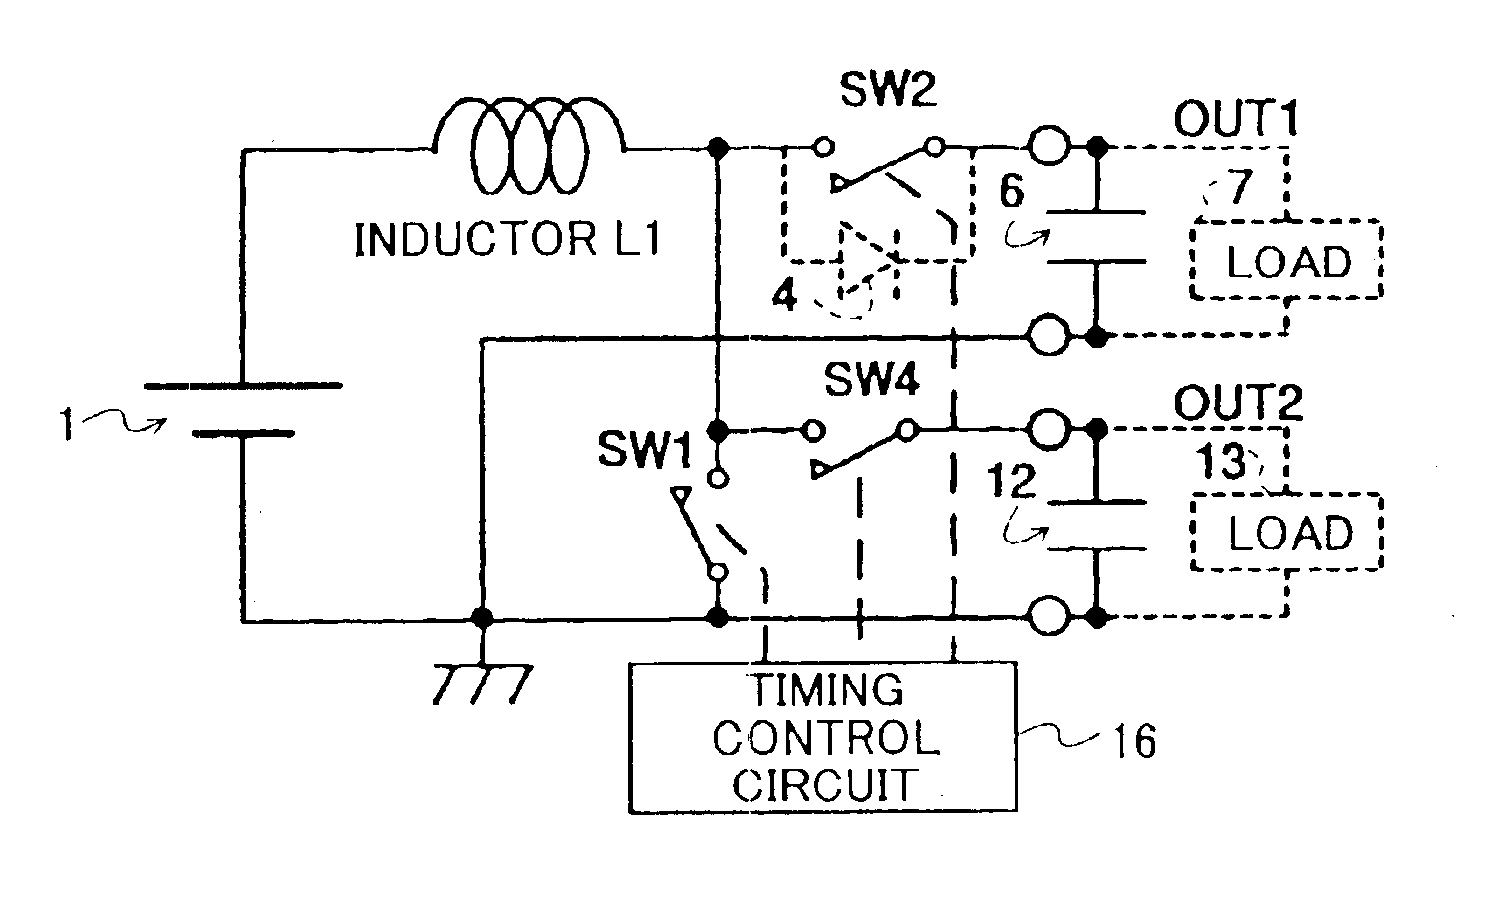 Switching regulator having two or more outputs